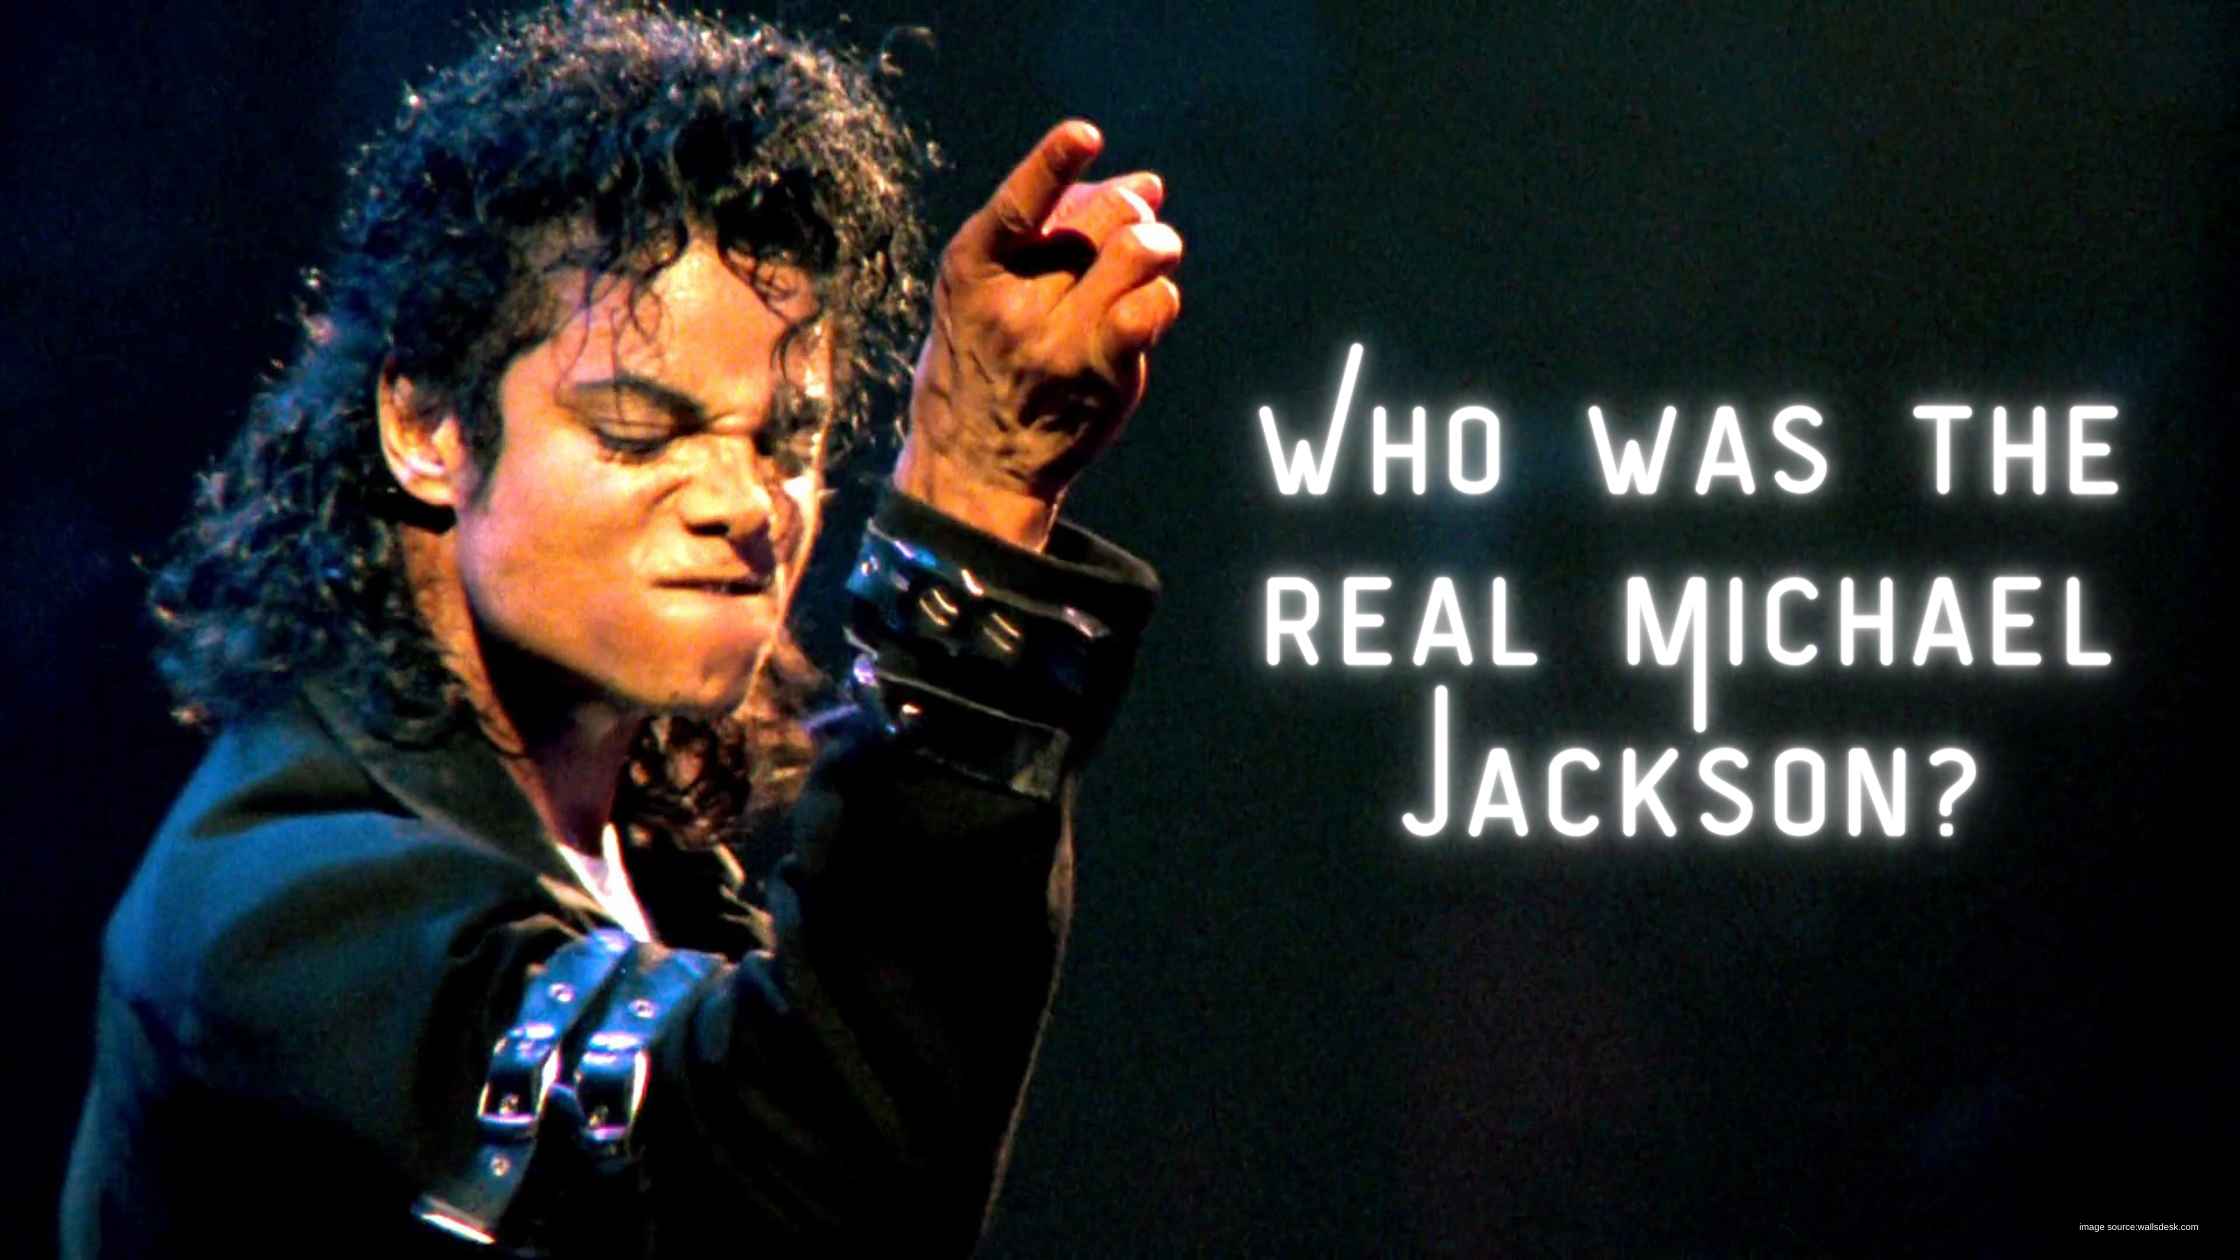 Who was the real Michael Jackson?